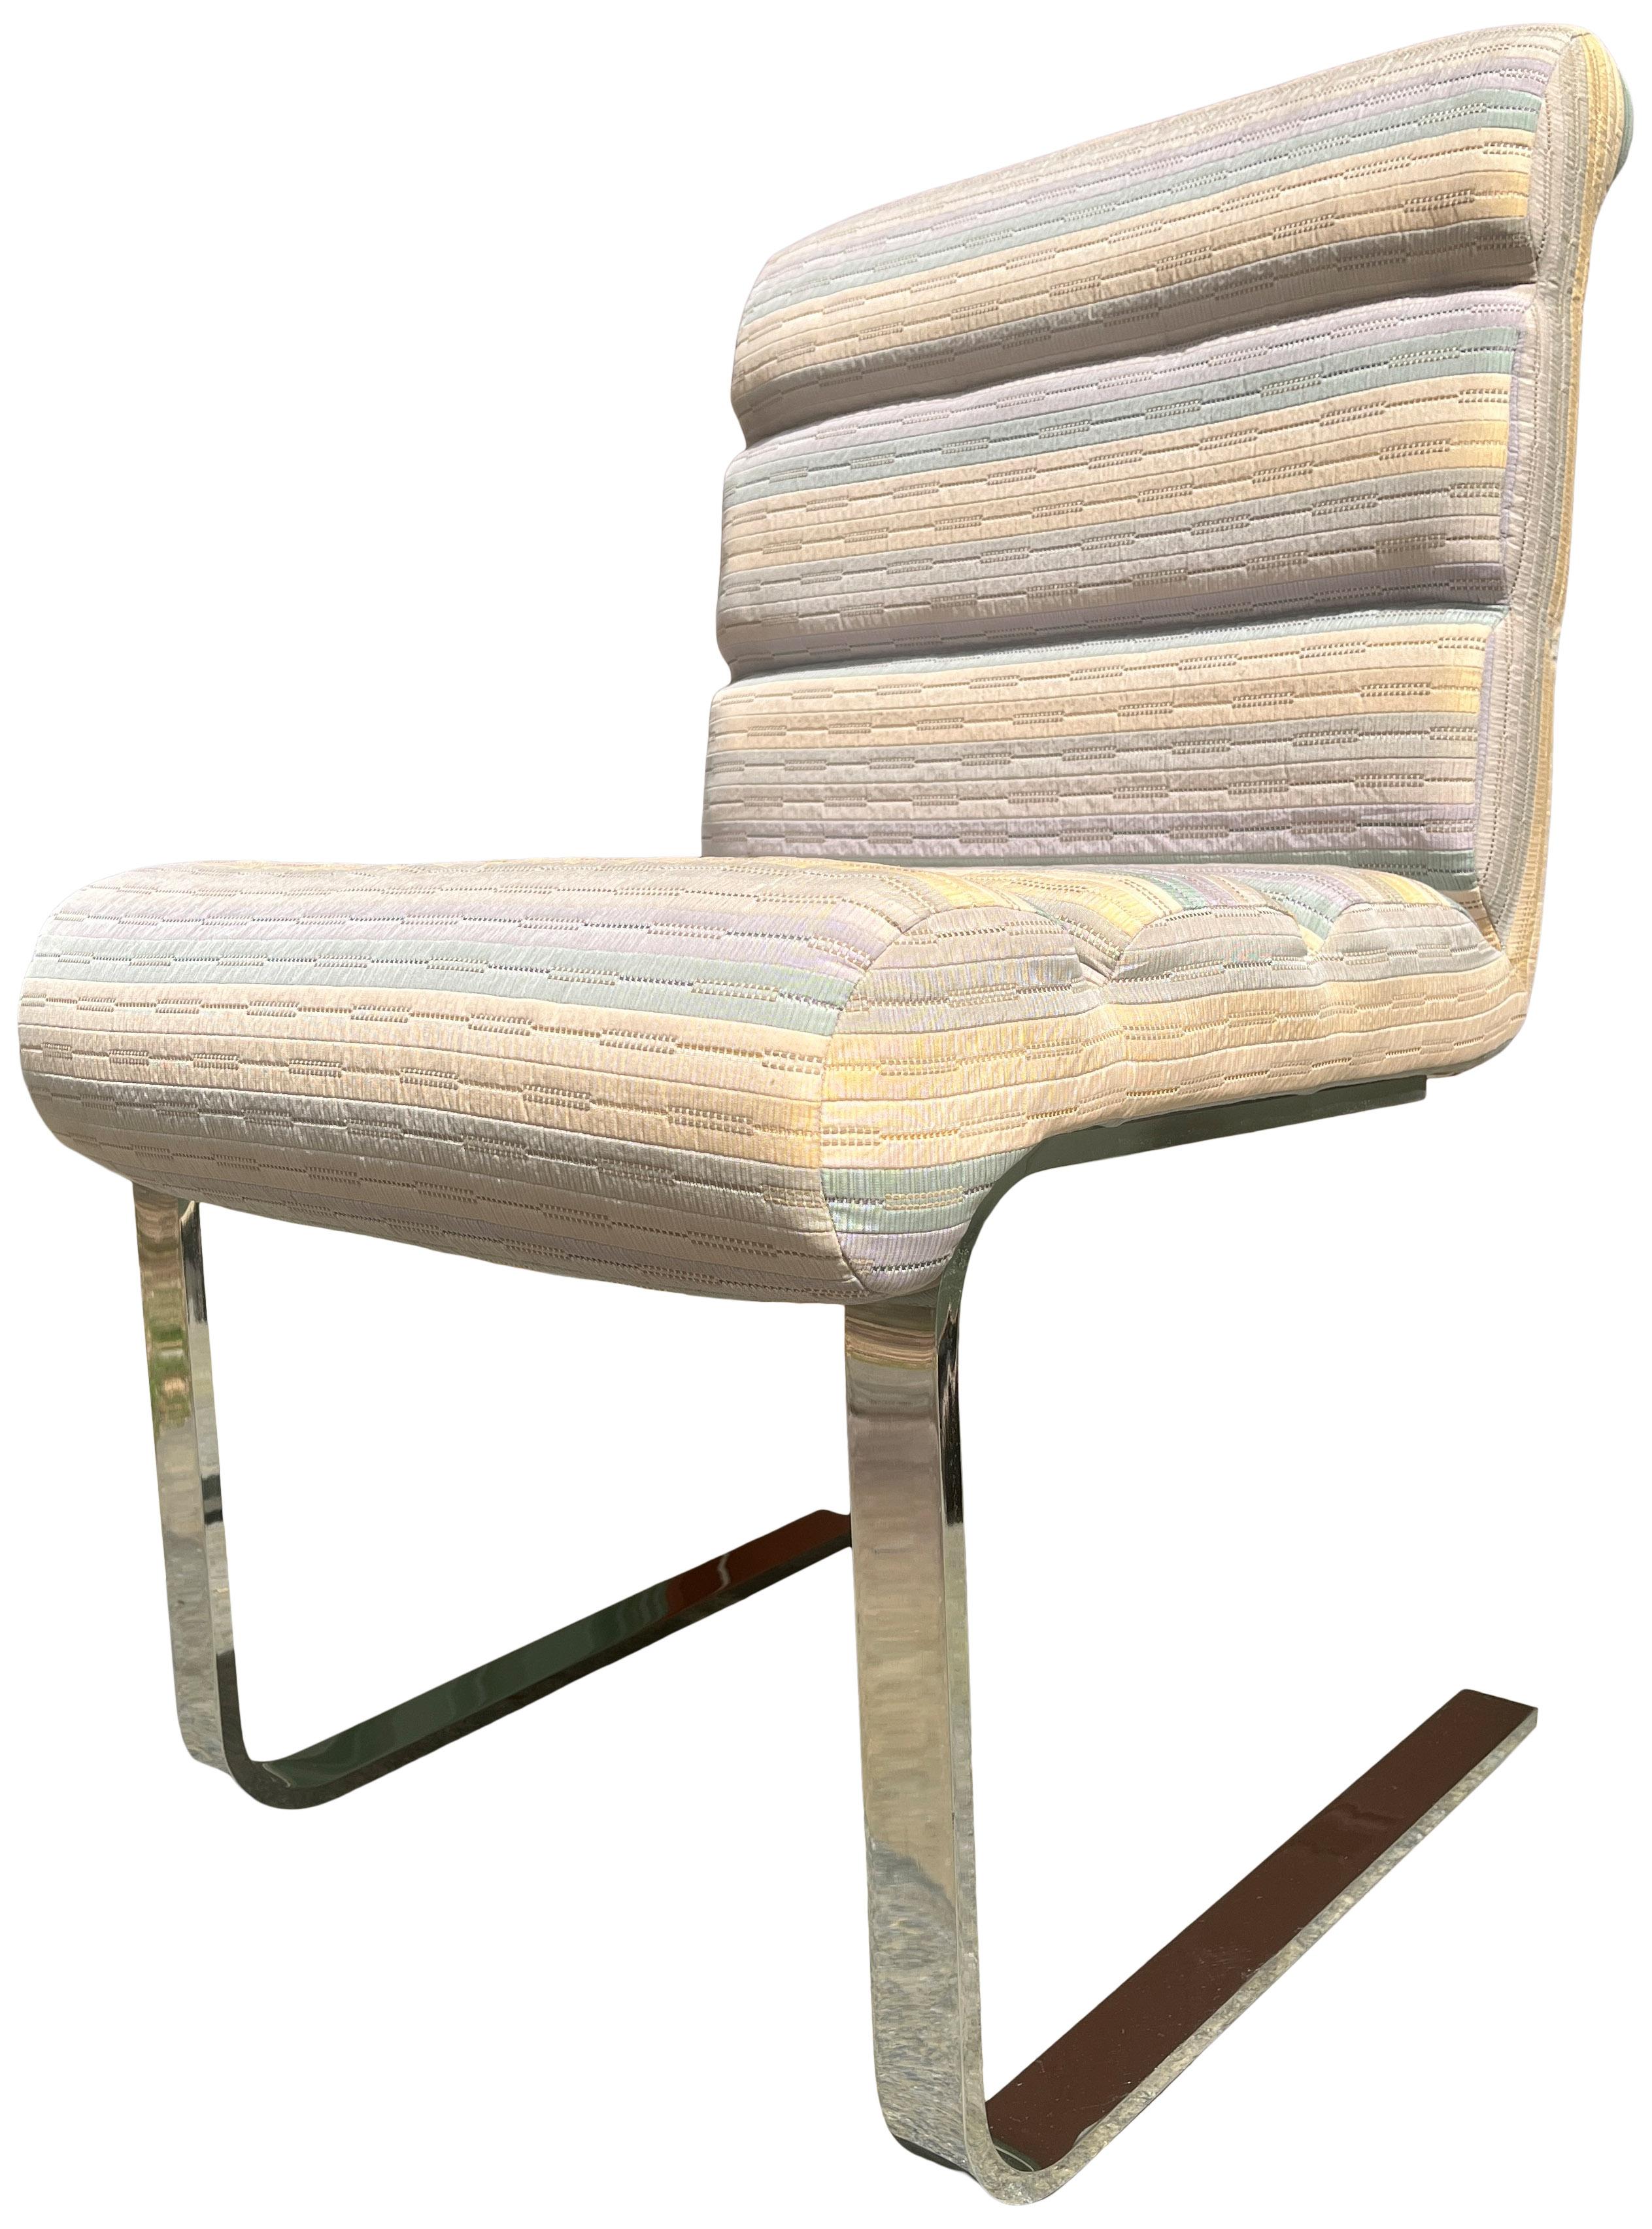 A set of six 'Lugano' dining chairs by designer Frank Mariani, manufactured by the Pace Collection, circa 1970s, upholstered backs and seats on cantilever bases on heavy chromed sled base.